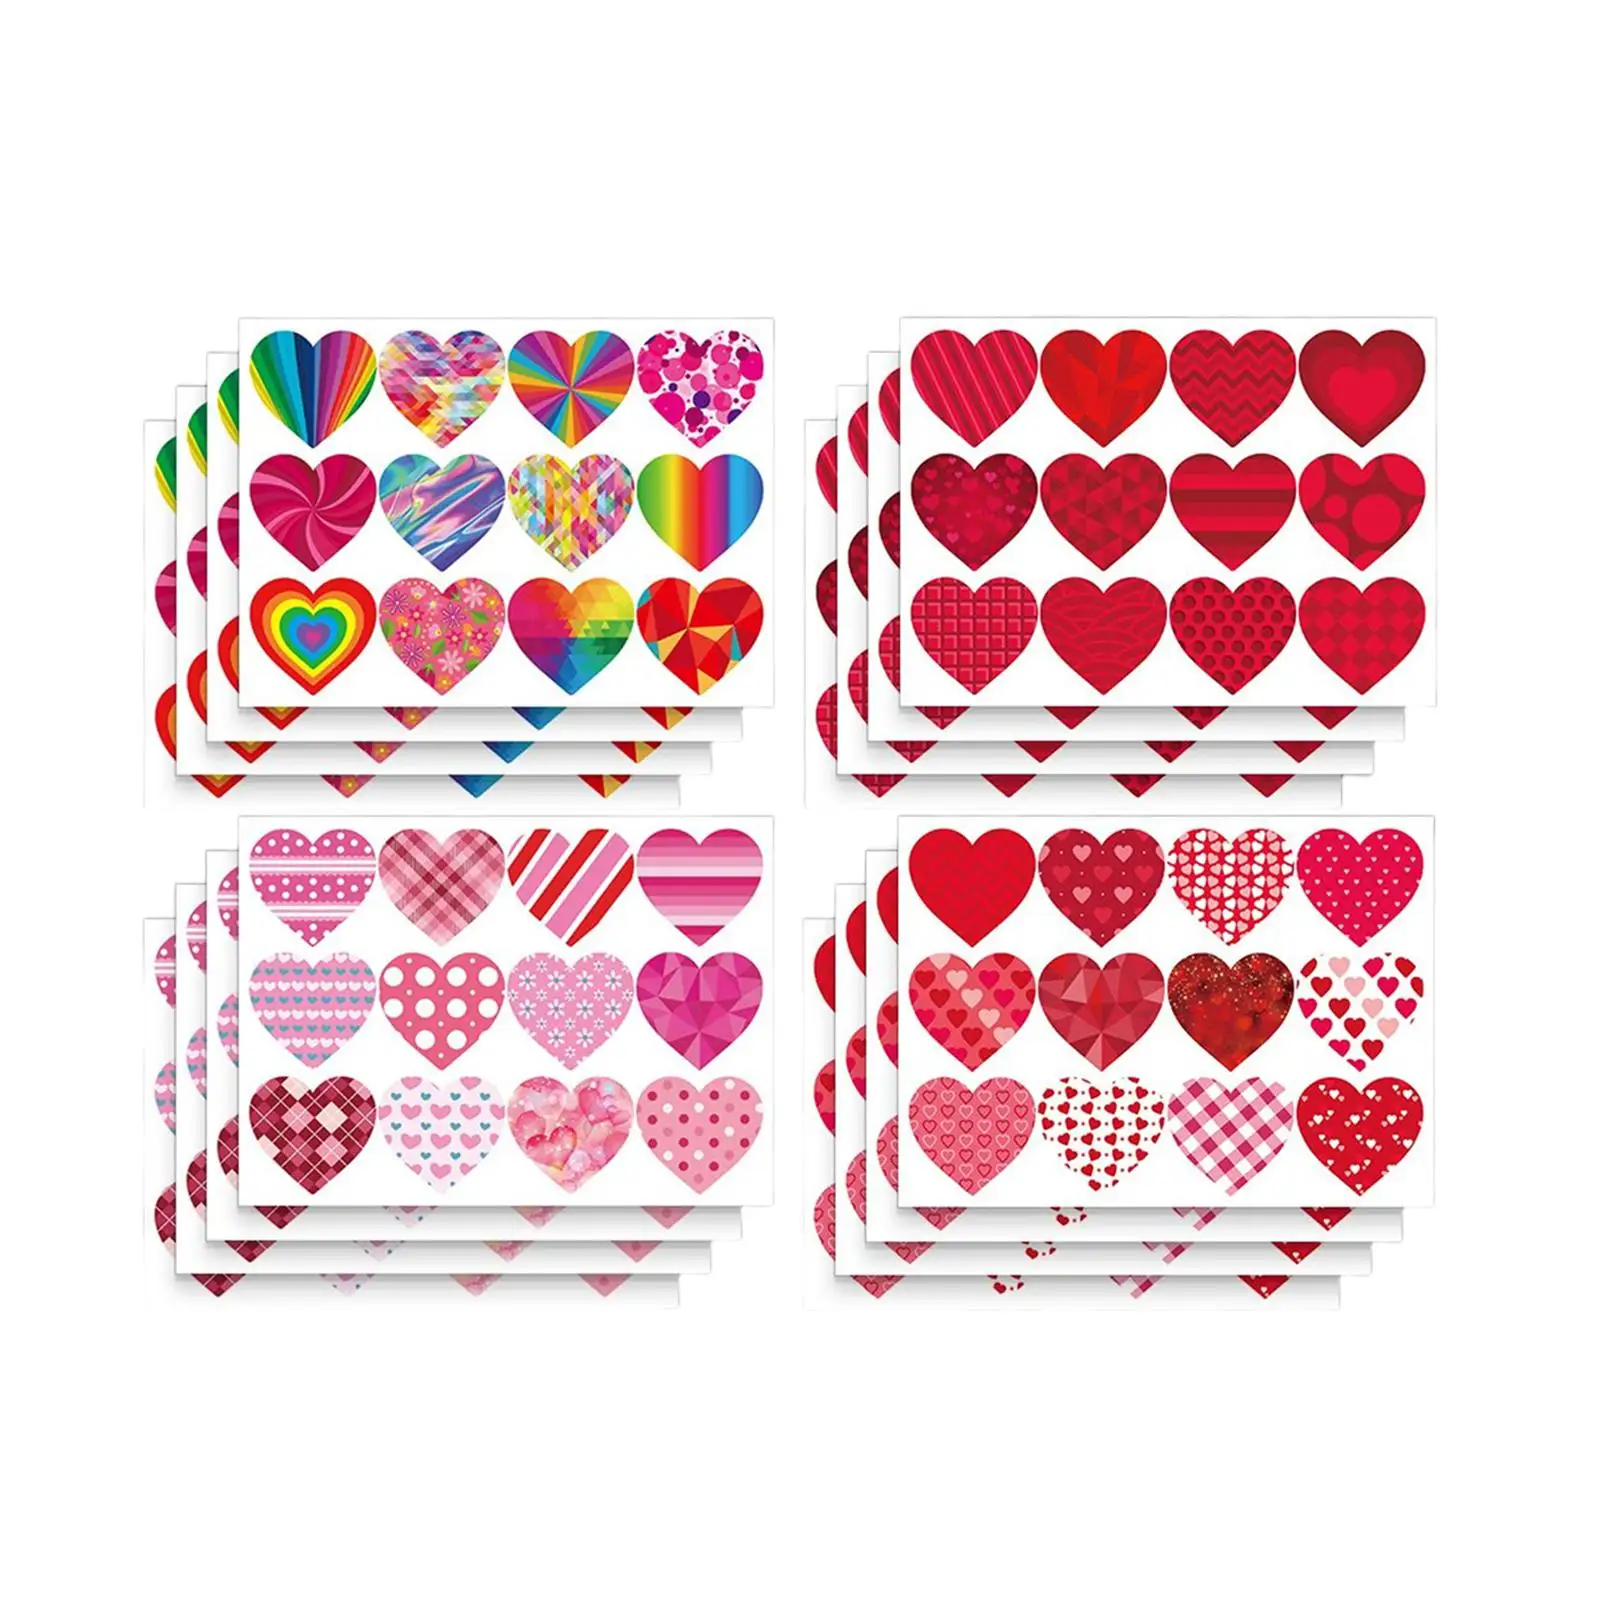 192x Heart Shaped Stickers Bouquet Wrapping Gift Packaging Tags Labels for Candy Pouch Anniversary New Year Festivals Party